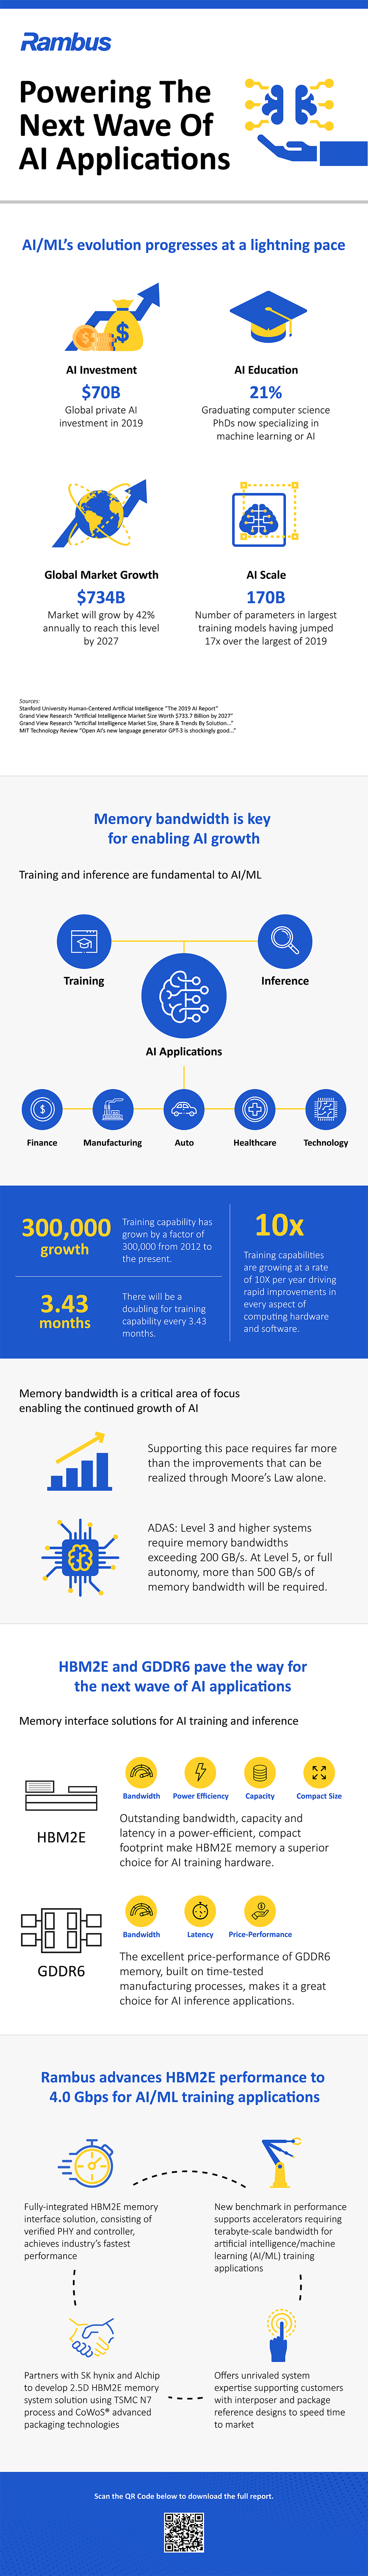 Powering the Next Wave of AI Applications - Infographic